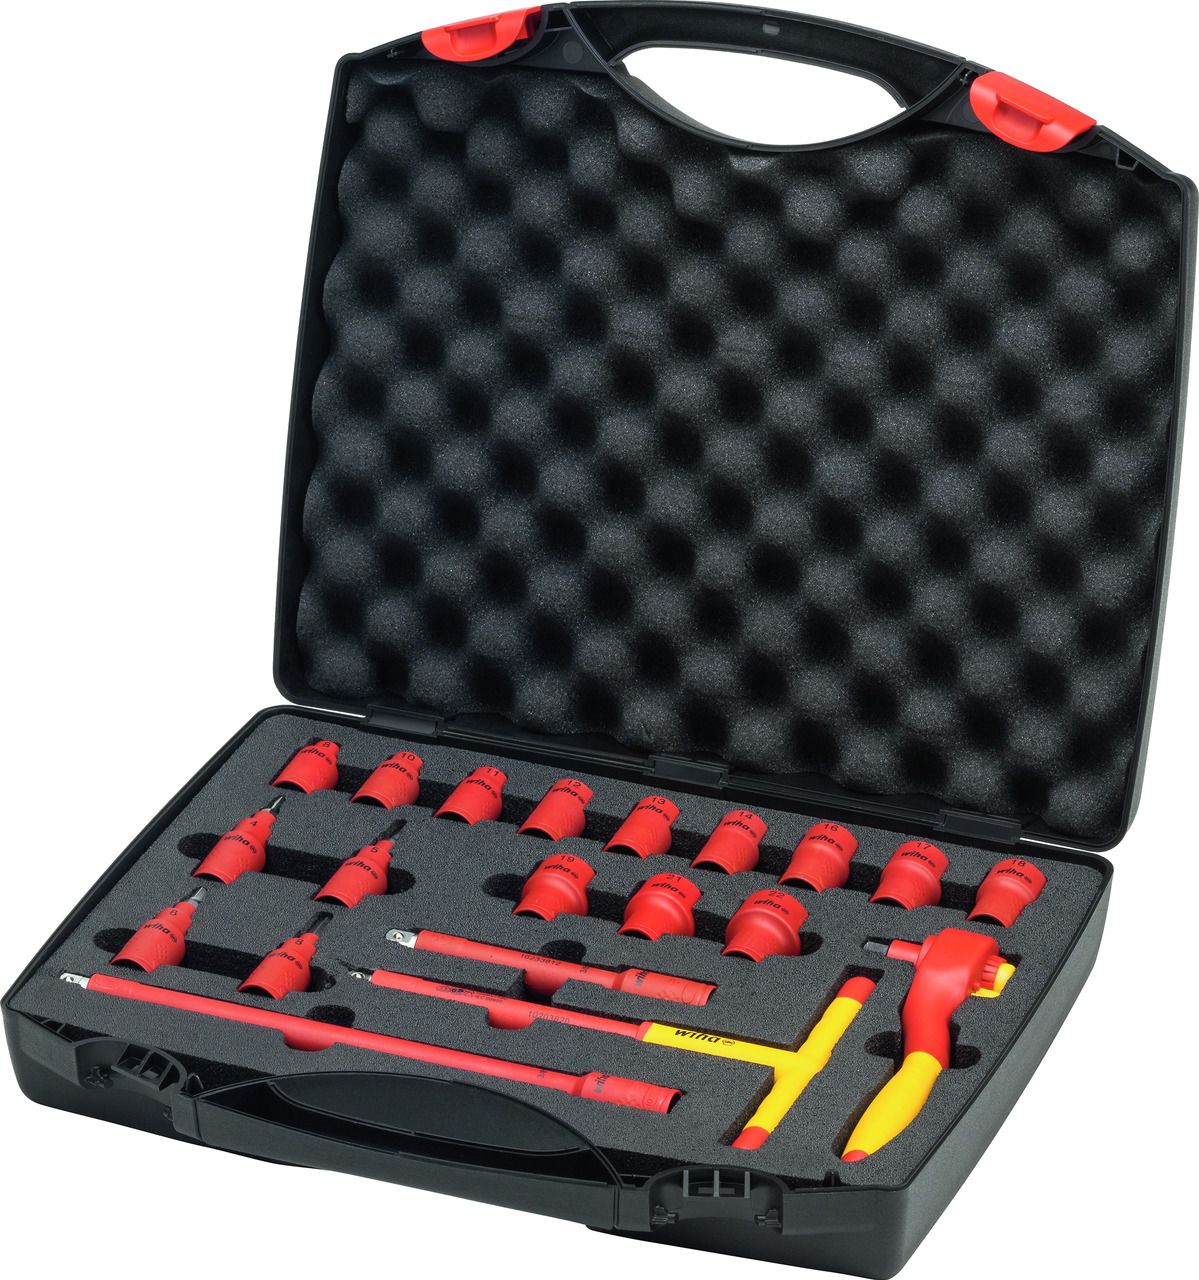 Wiha Tools 43023 21 Piece , 3/8 in Ratchet Wrench and Bit Set